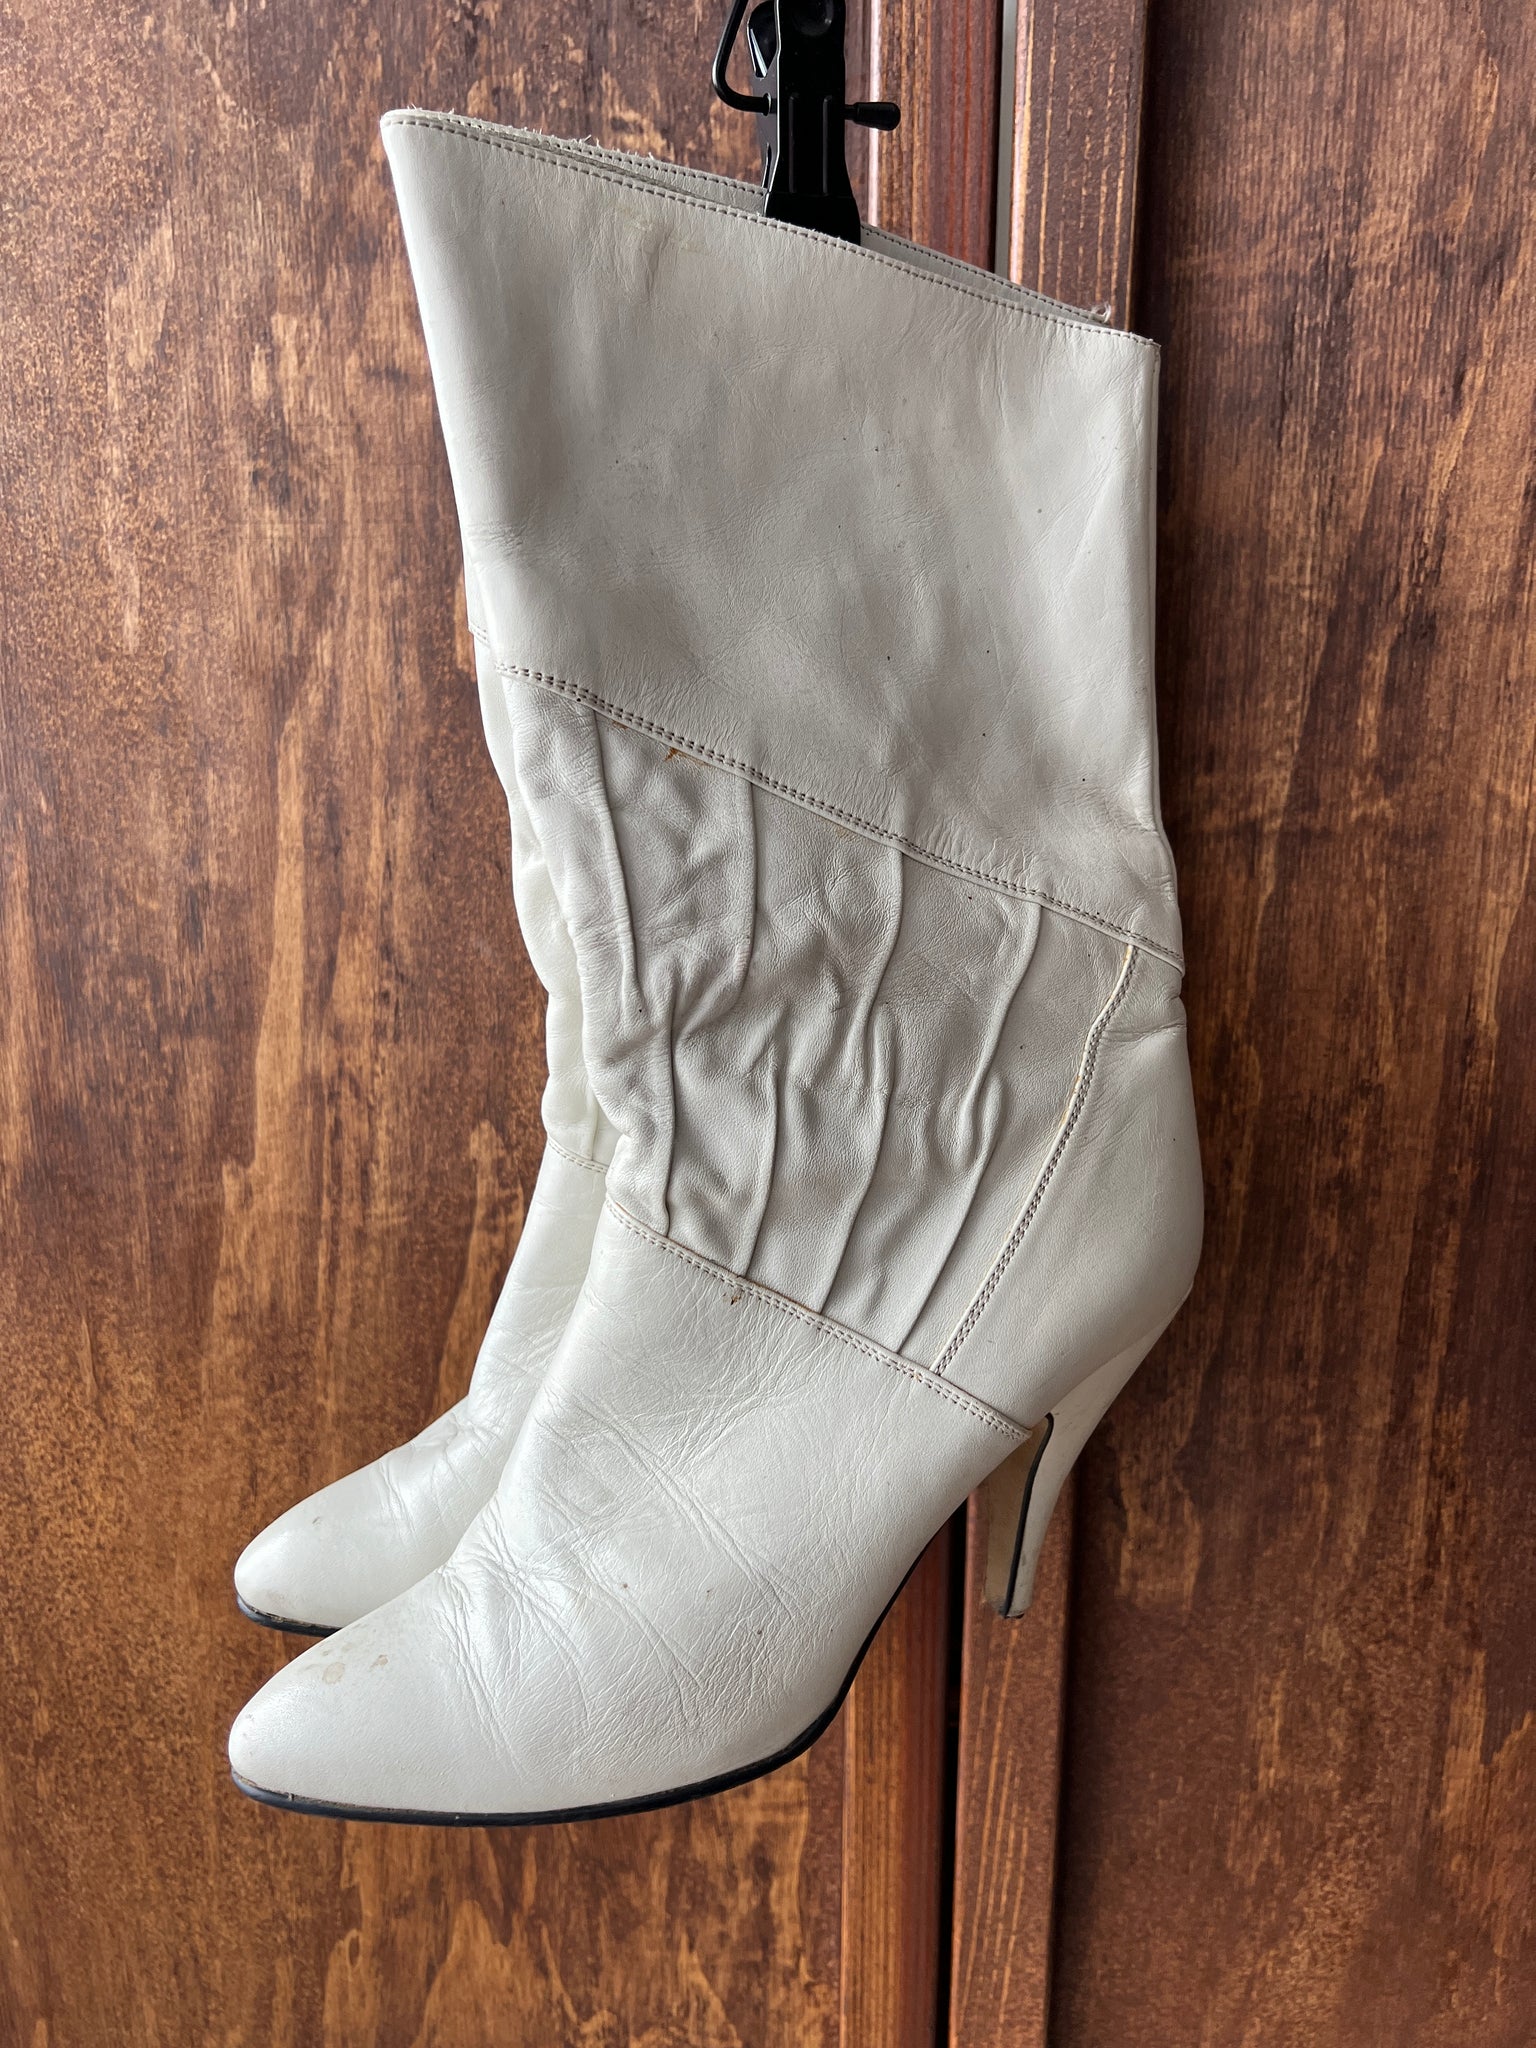 1980s SHOES-BOOTS- cream leather heeled